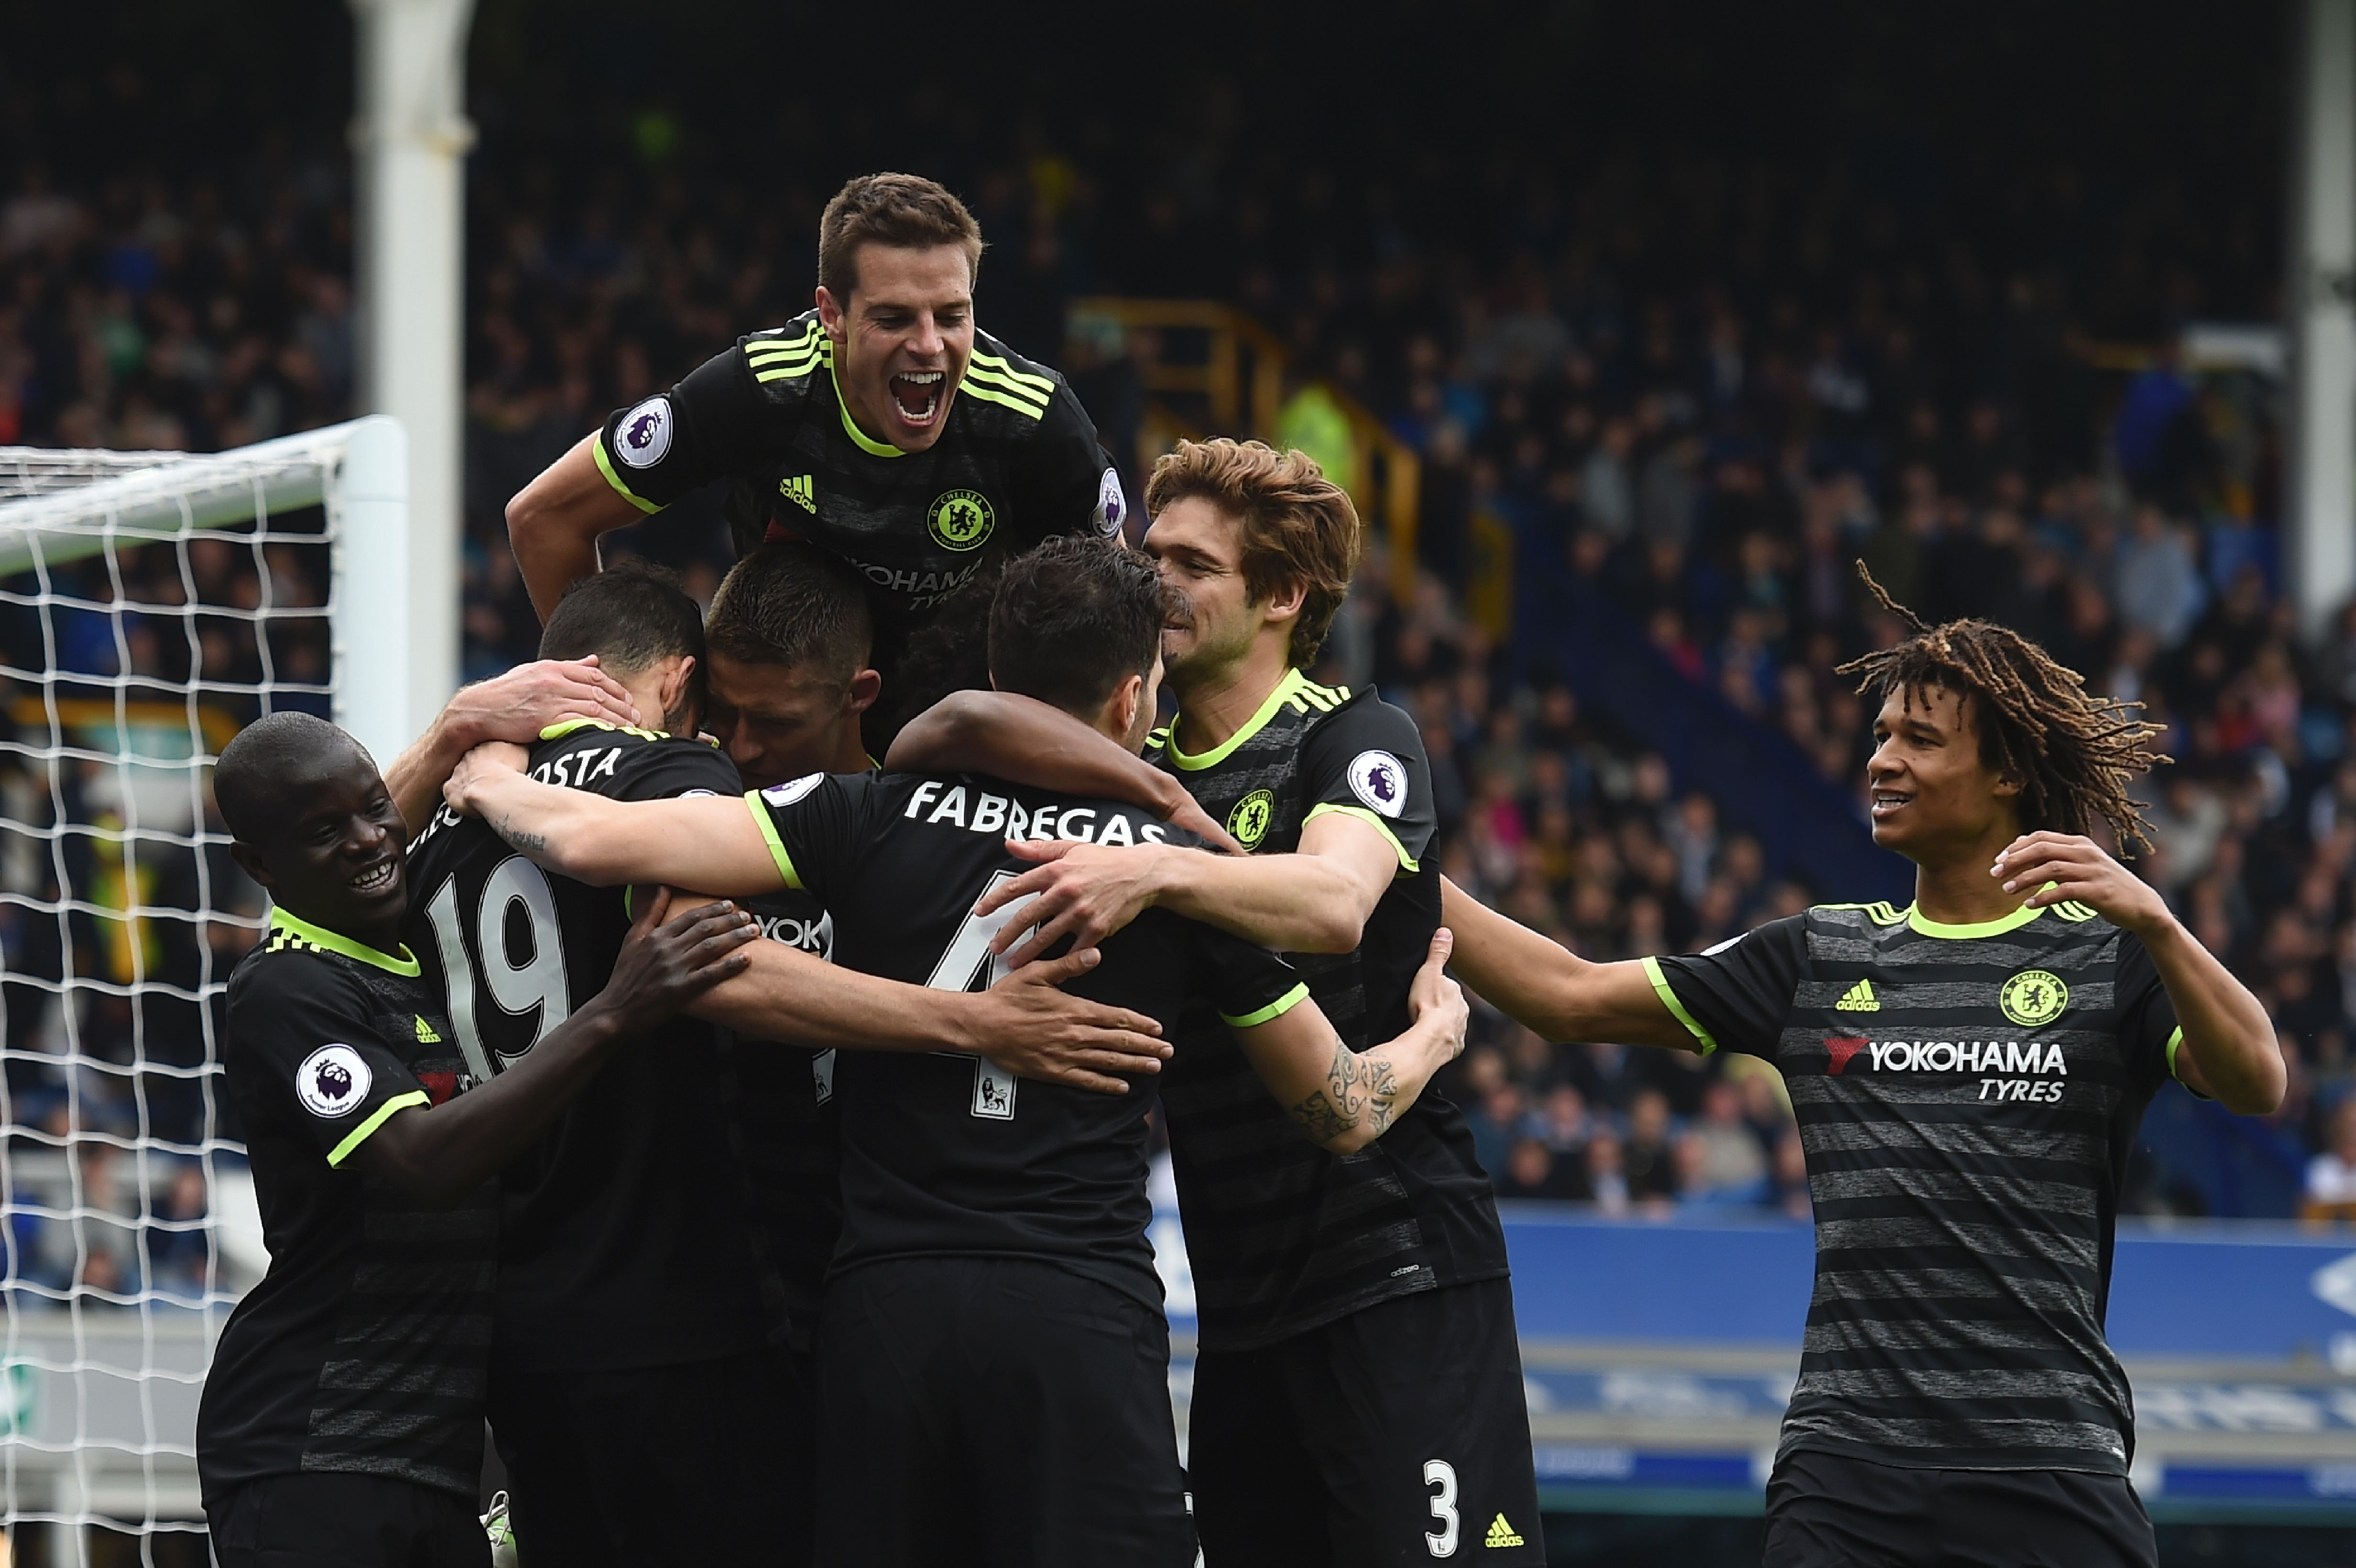 Chelsea's Spanish defender Cesar Azpilicueta (top C) jumps onto the celebration after Chelsea's Brazilian midfielder Willian scored their third goal during the English Premier League football match between Everton and Chelsea at Goodison Park in Liverpool, north west England on April 30, 2017. / AFP PHOTO / PAUL ELLIS / RESTRICTED TO EDITORIAL USE. No use with unauthorized audio, video, data, fixture lists, club/league logos or 'live' services. Online in-match use limited to 75 images, no video emulation. No use in betting, games or single club/league/player publications.  /         (Photo credit should read PAUL ELLIS/AFP/Getty Images)